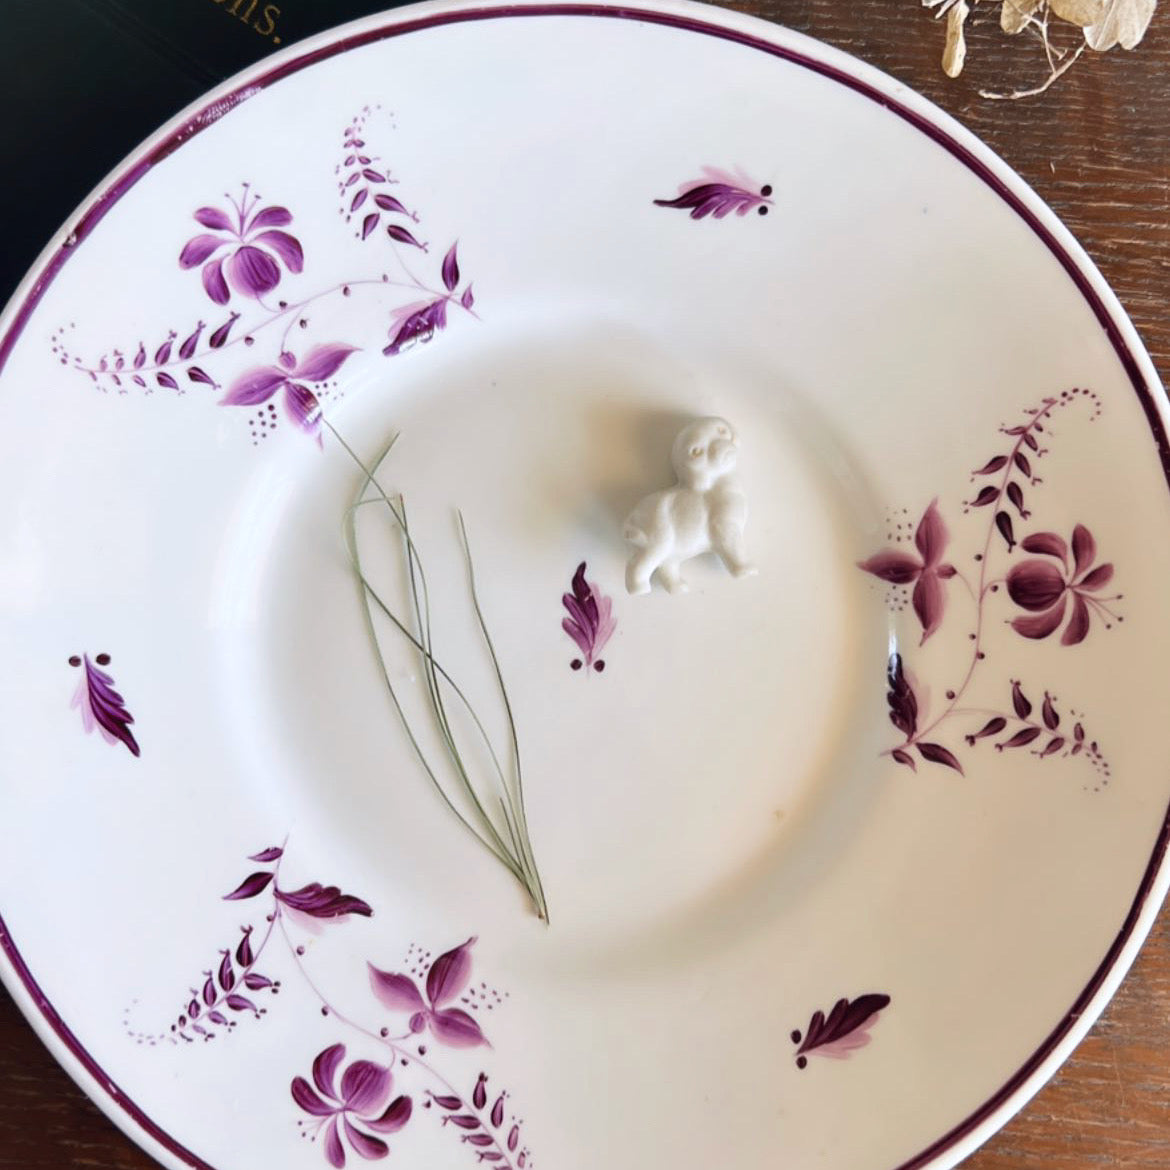 Antique Stoneware Plate with Wisteria Pattern